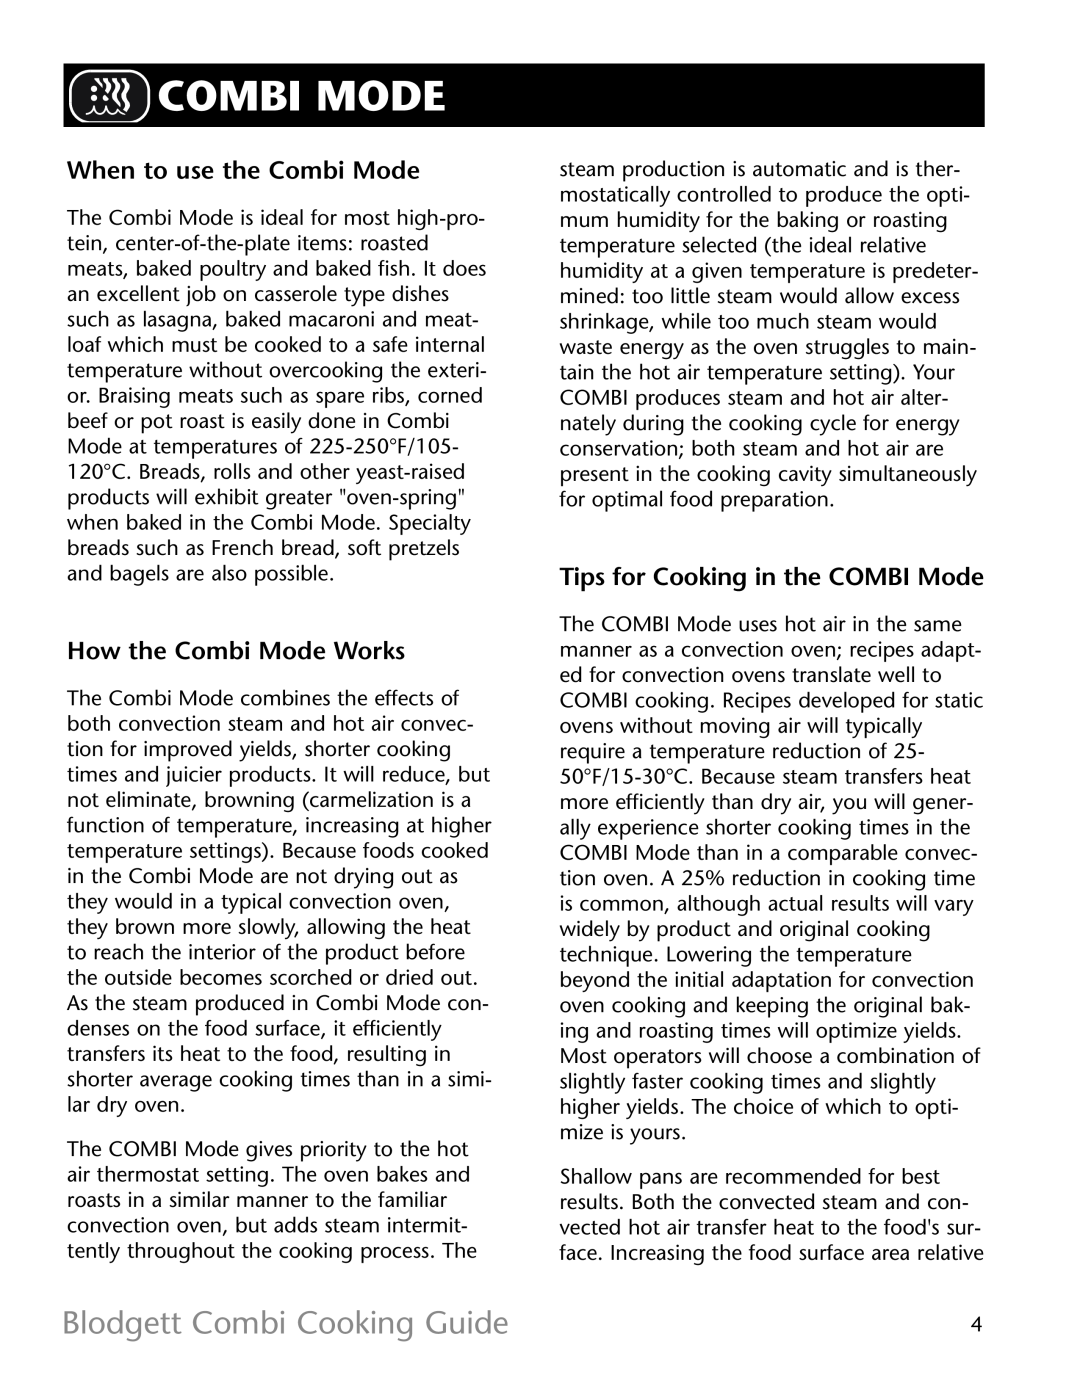 Blodgett R11021 manual When to use the Combi Mode, How the Combi Mode Works, Tips for Cooking in the COMBI Mode 